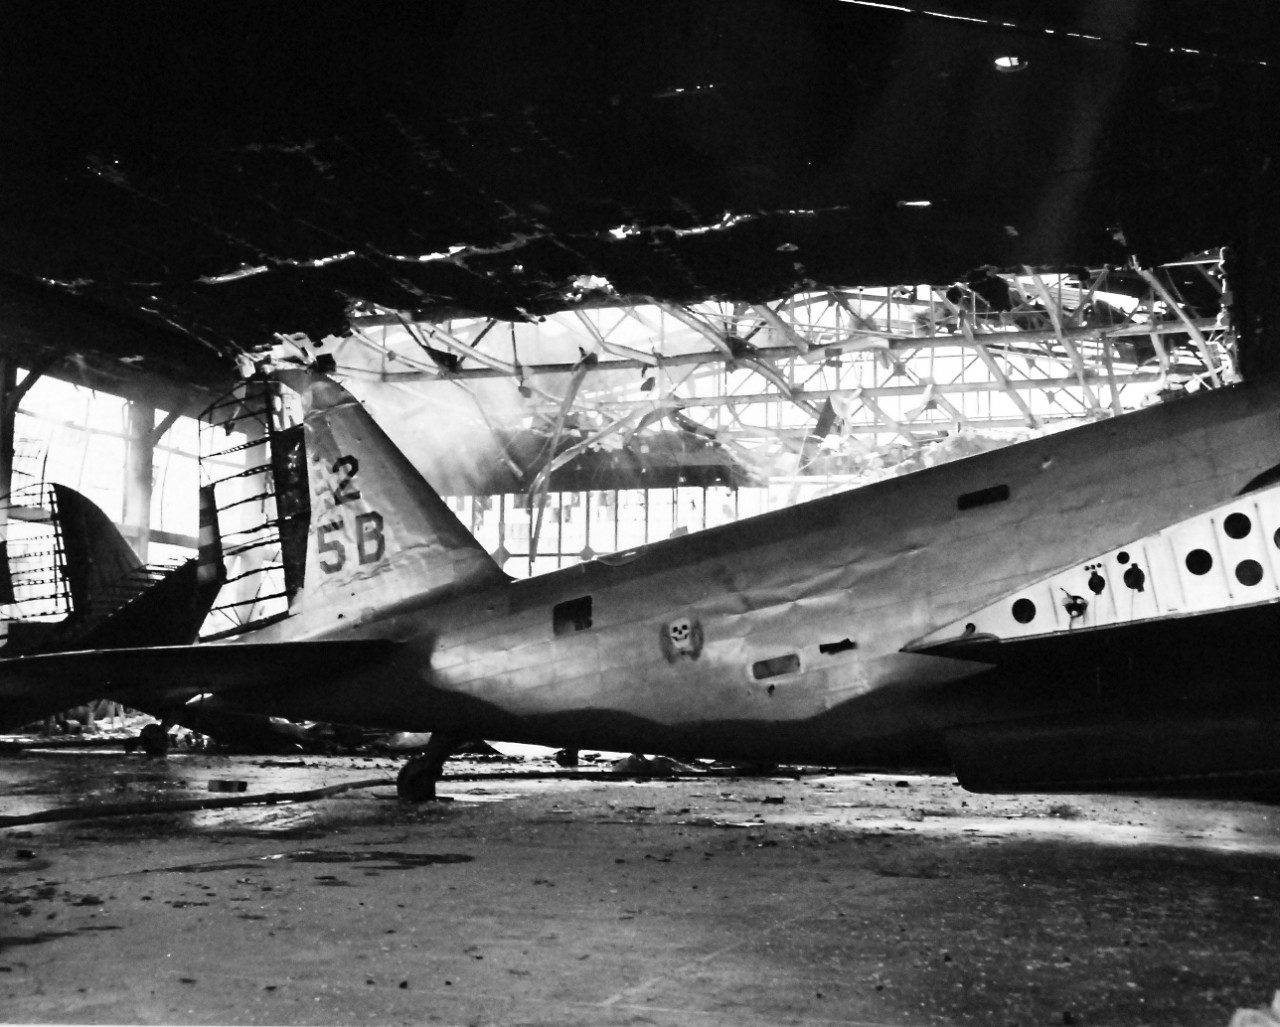 80-G-32904:  Japanese Attack on Pearl Harbor, December 7, 1941.    Damaged hangar and plane at Pearl Harbor, 7 December 1941.  Official U.S. Navy photograph, now in the collections of the National Archives.    (8/27/2013).